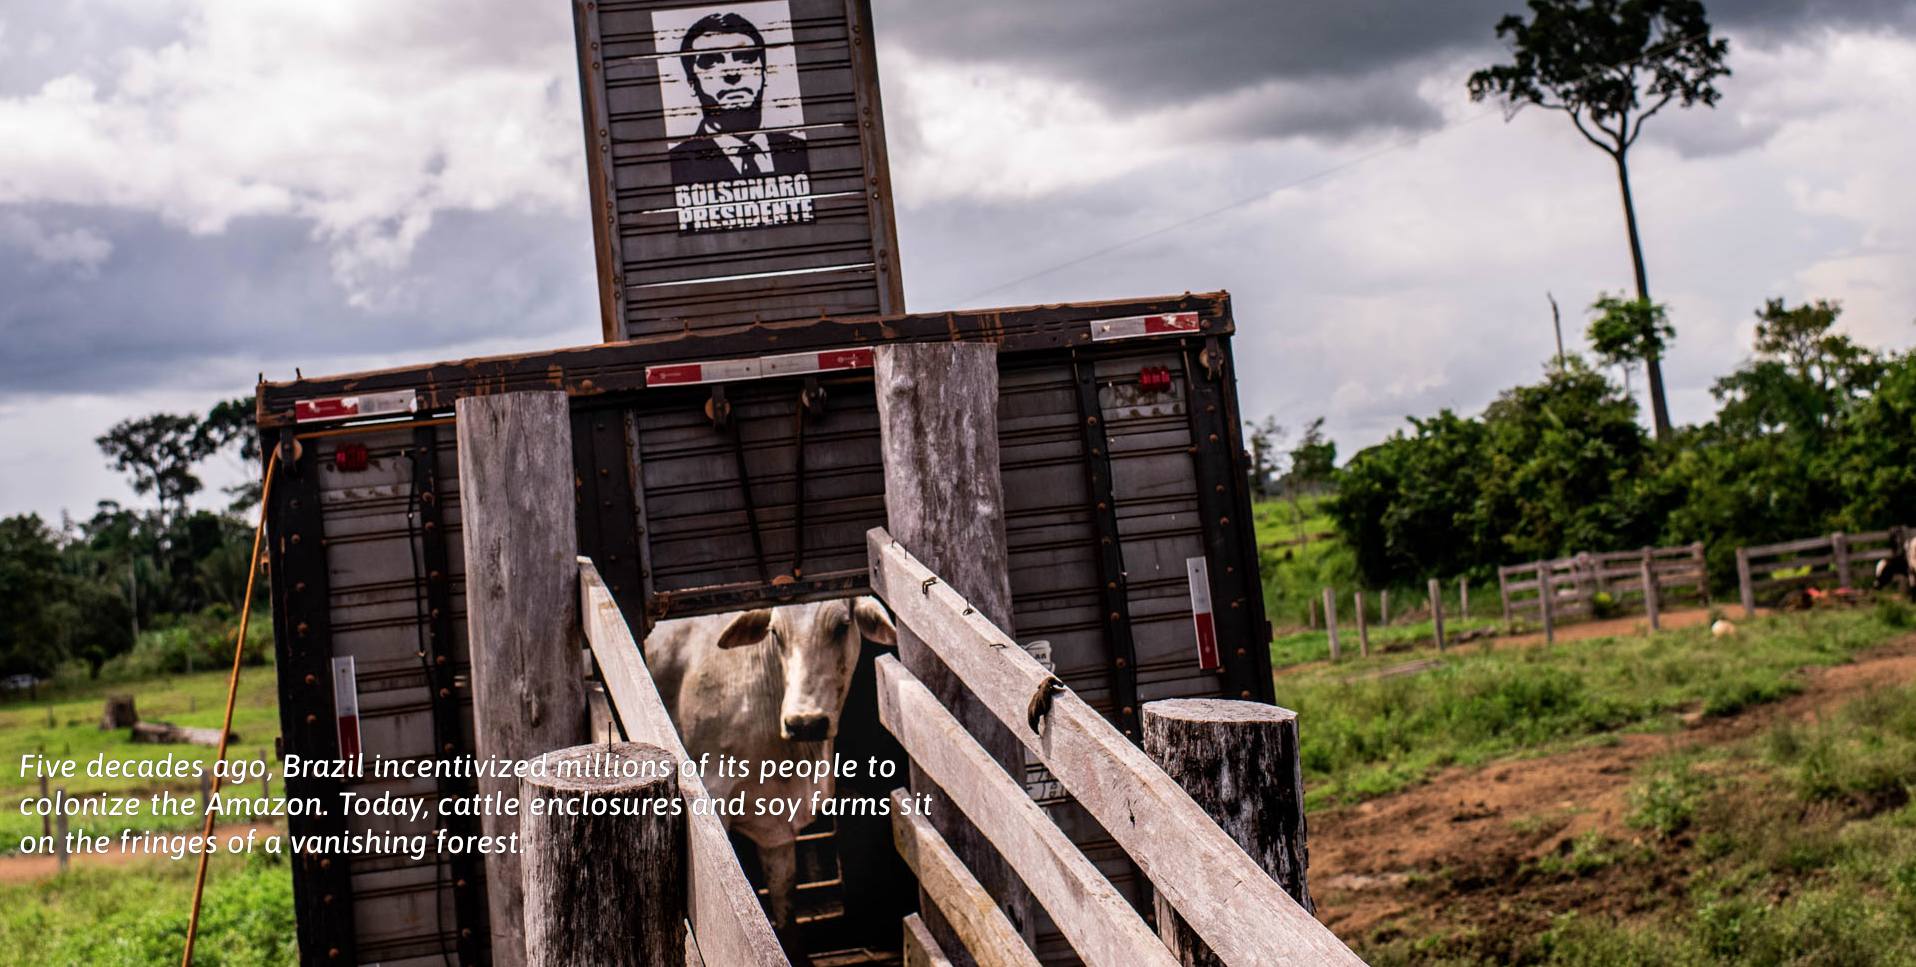 Five decades ago, Brazil incentivized millions of its people to colonize the Amazon. Today, cattle enclosures and soy farms sit on the fringes of a vanishing forest. Image by Sebastián Liste. Brazil, 2019.